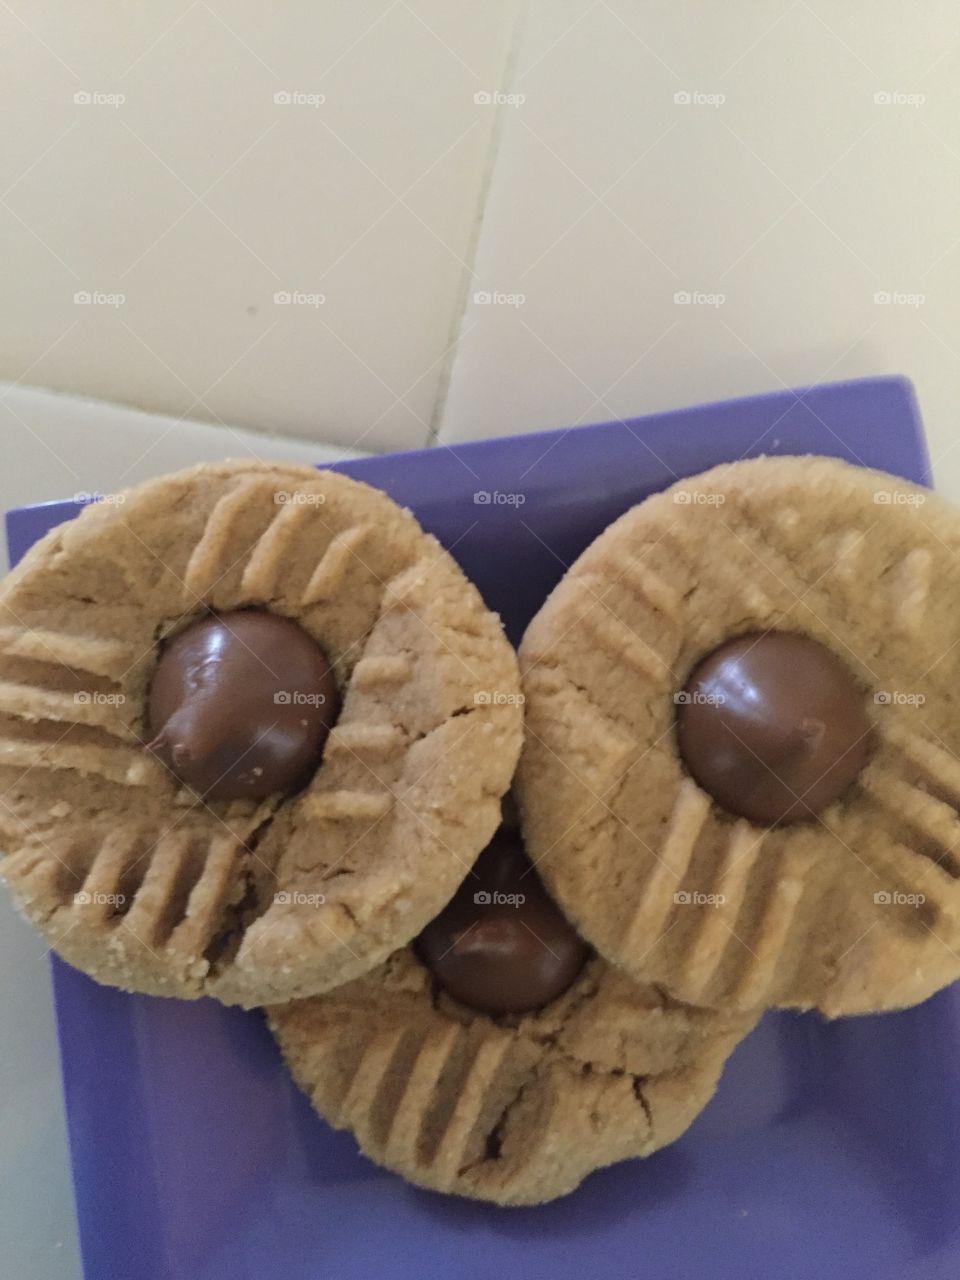 Best homemade peanut butter cookies with a kiss!